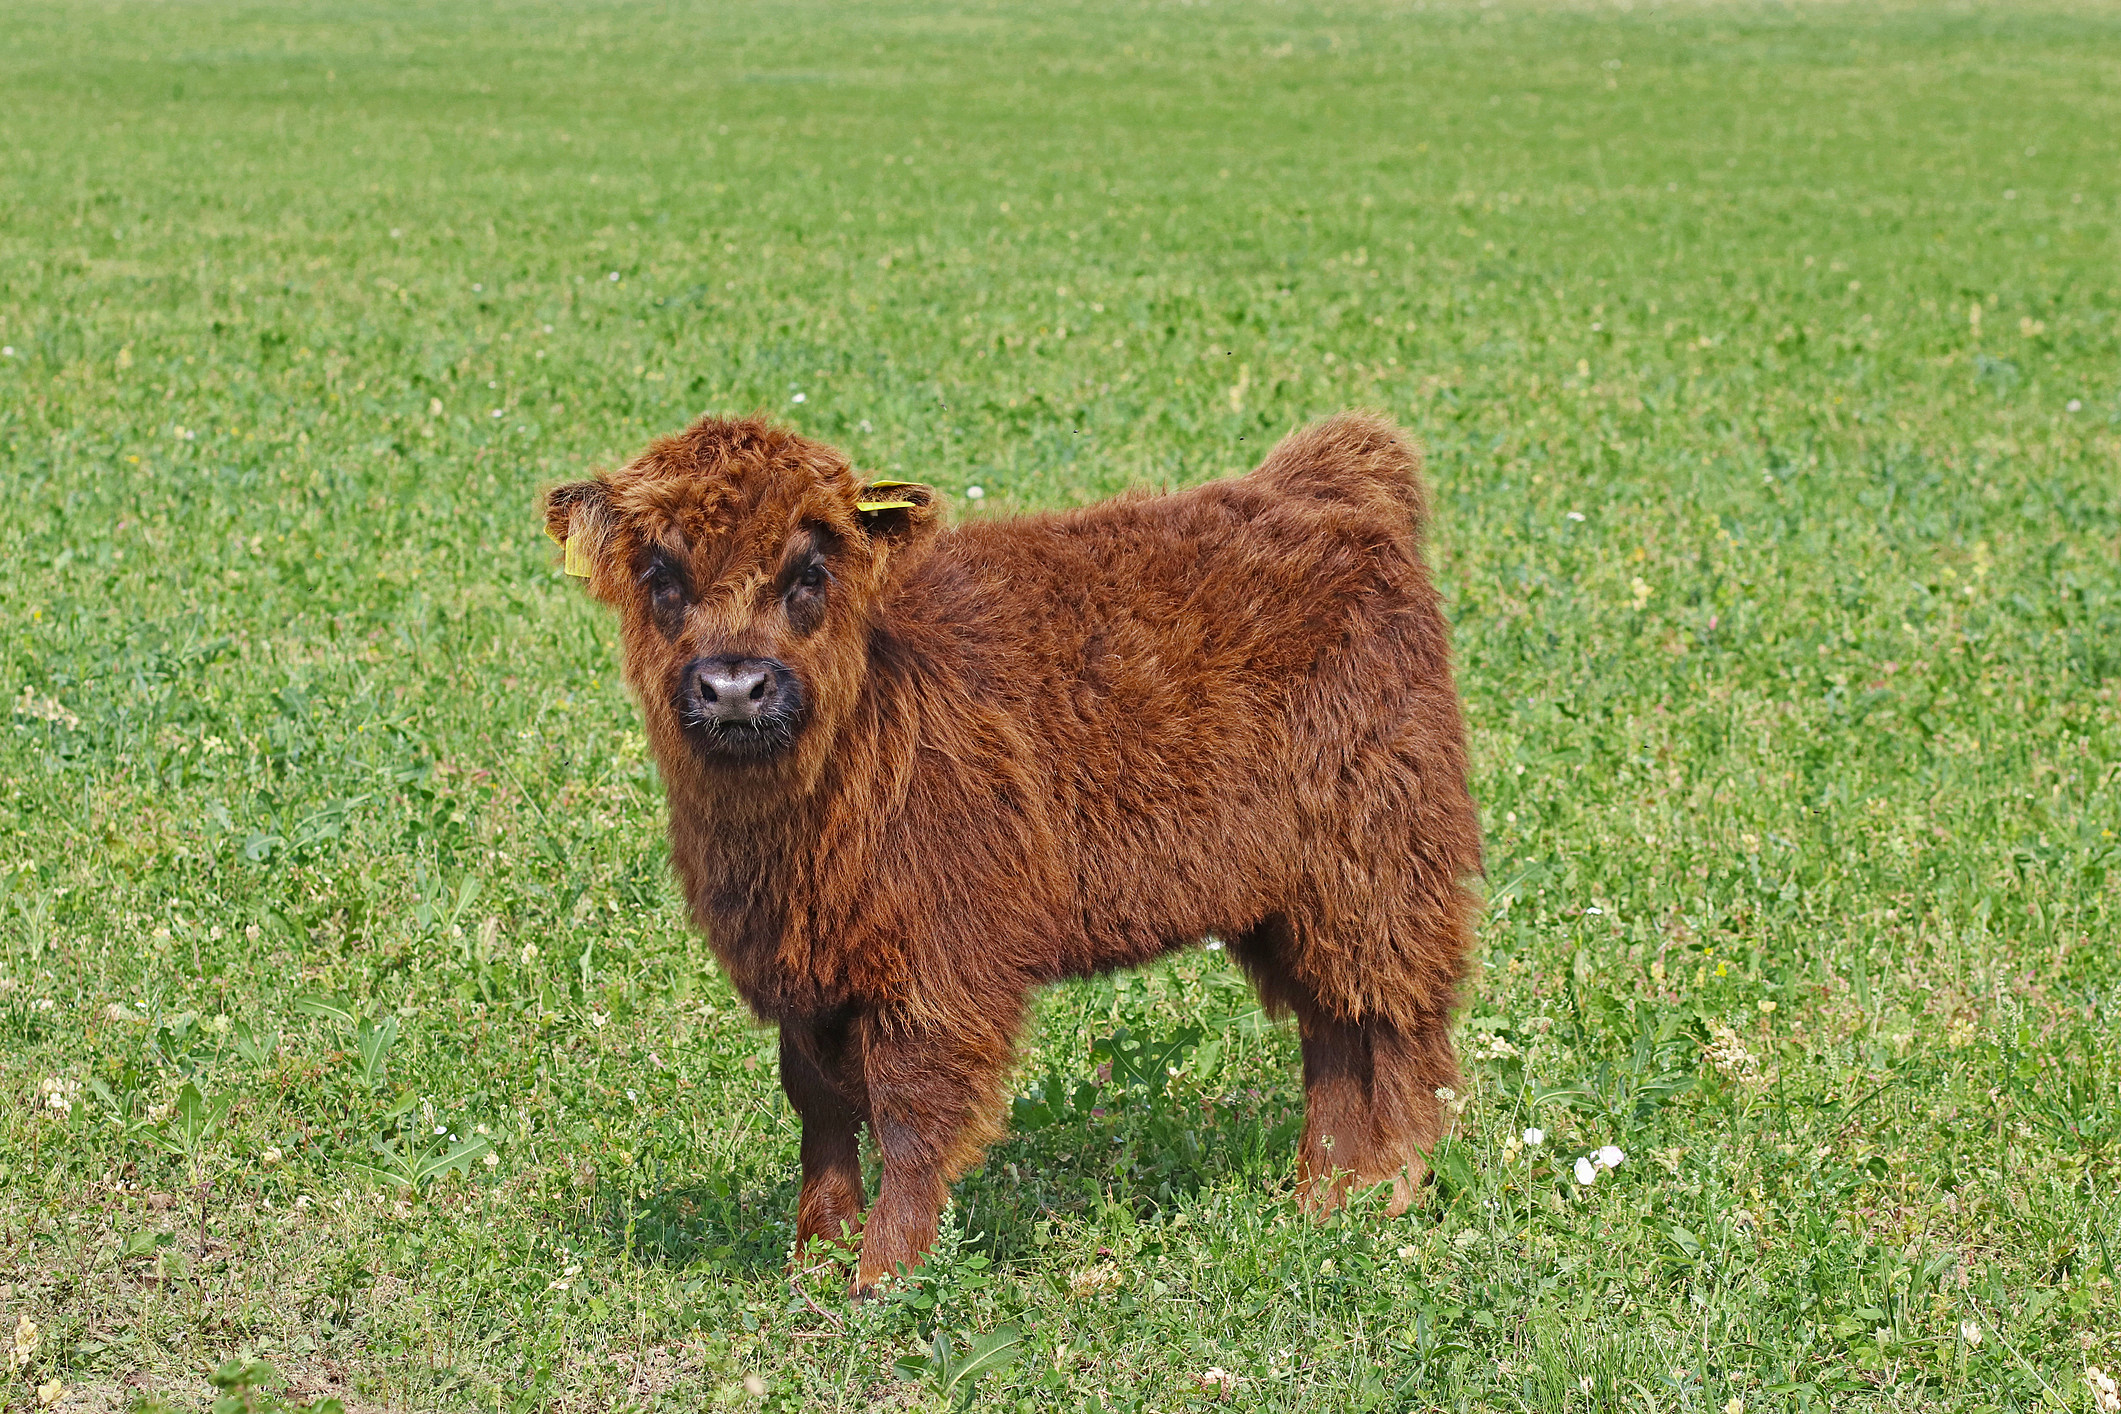 59 Best Images Mini Cows To Purchase As Pets : Raising Miniature Cattle